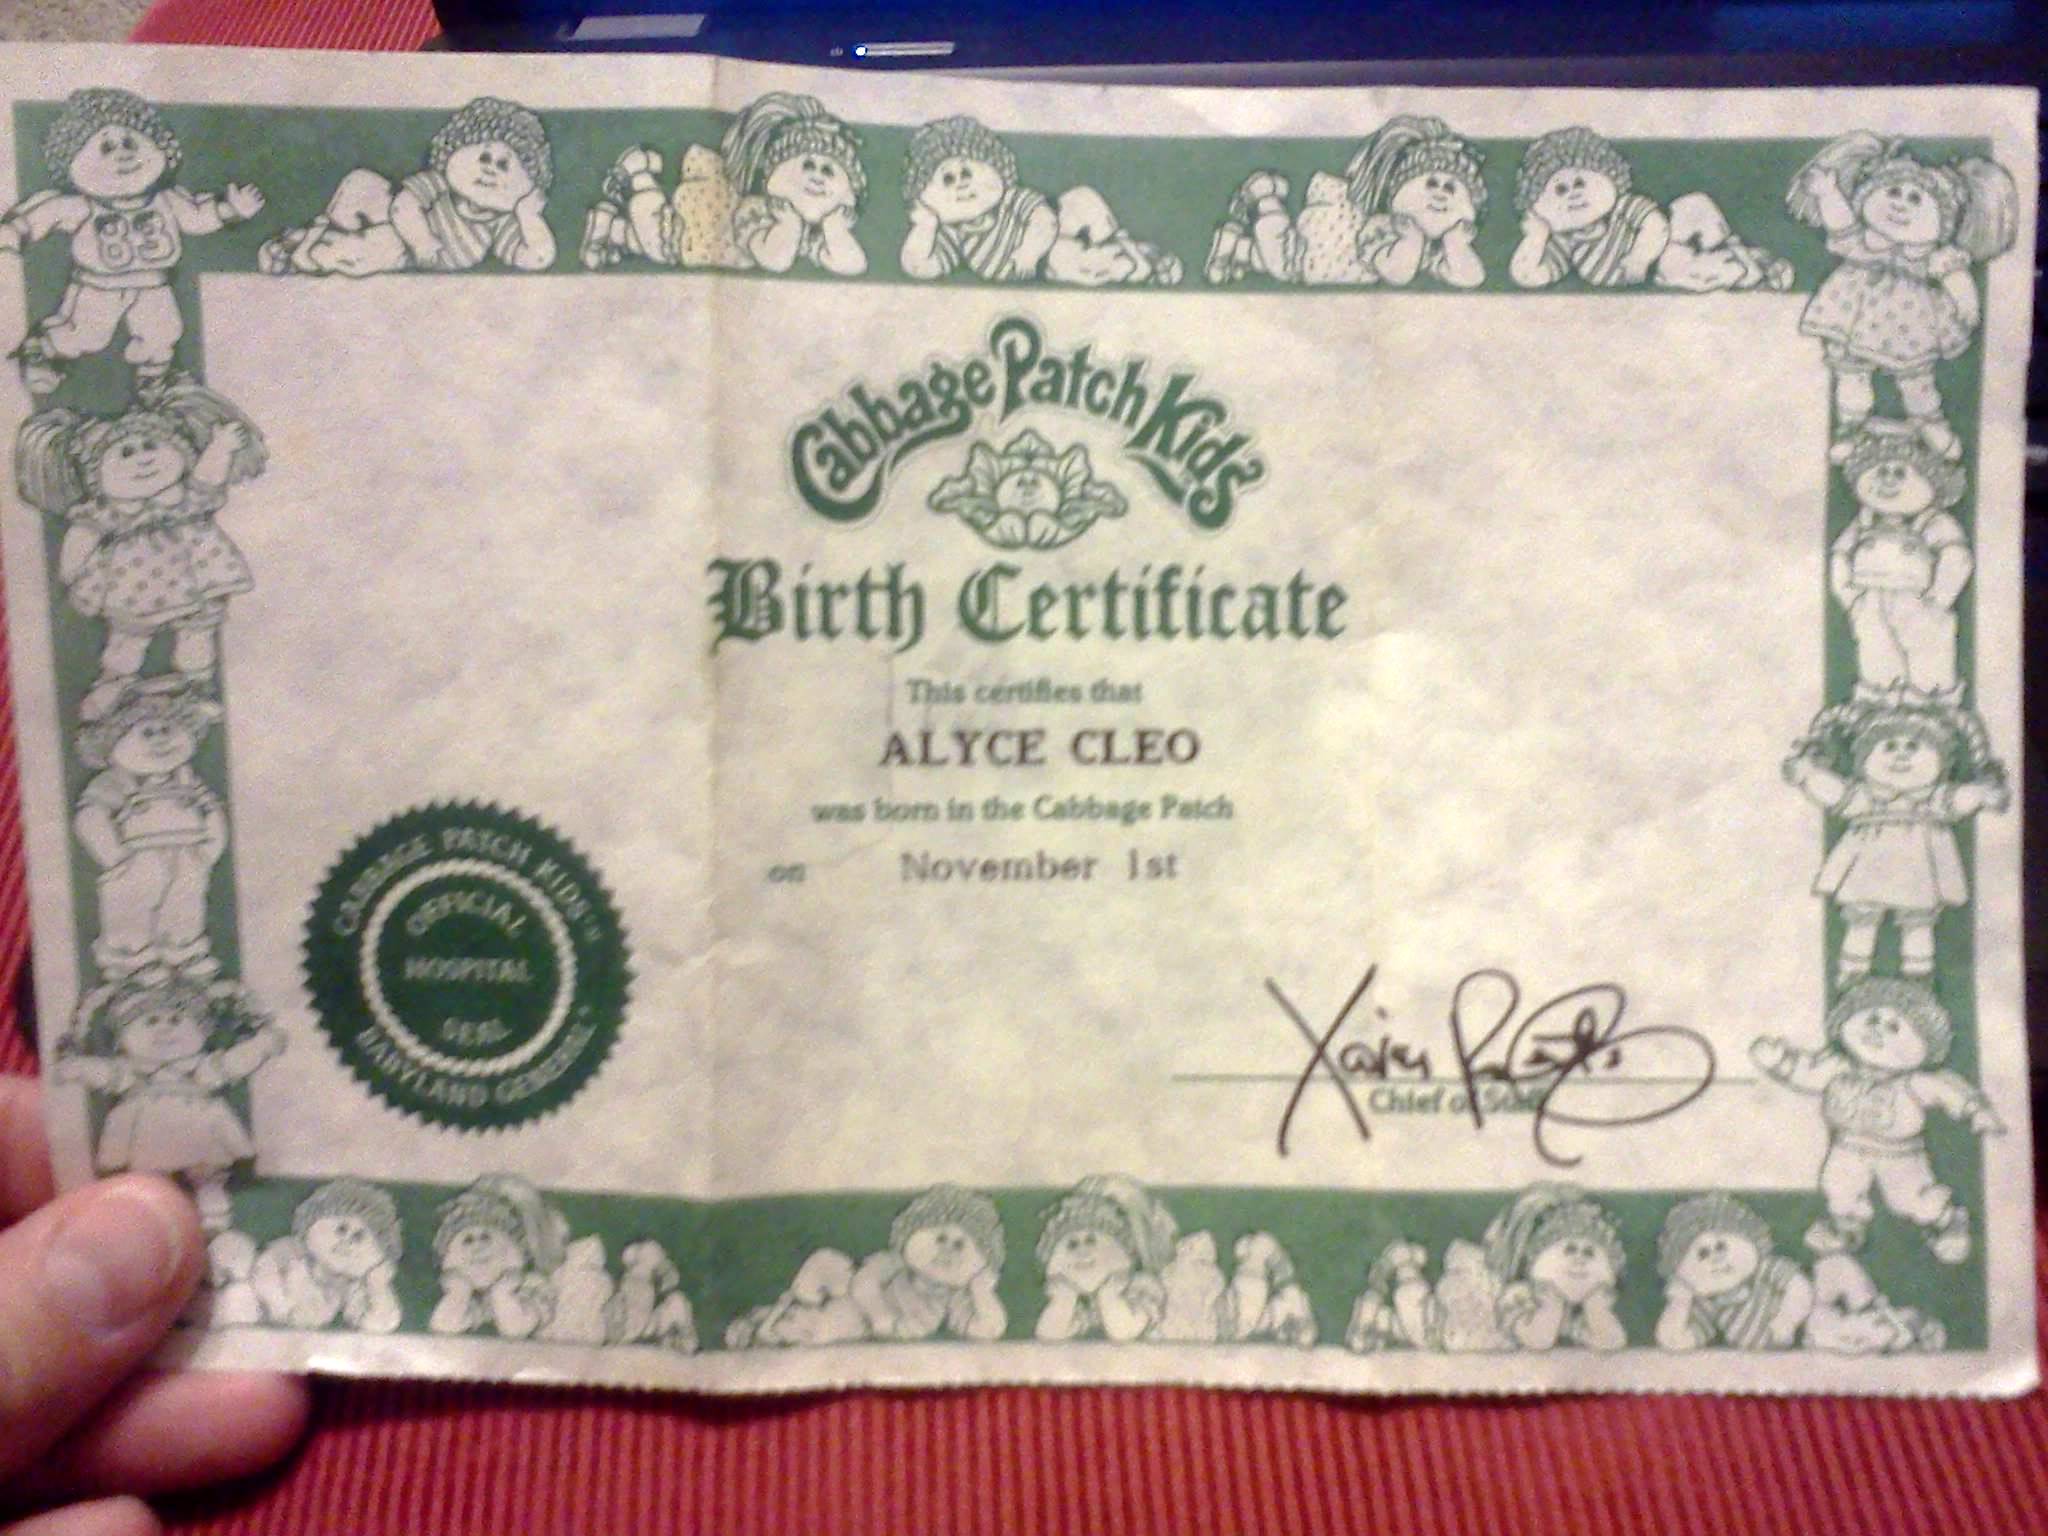 Cabbage Patch Birth Certificate